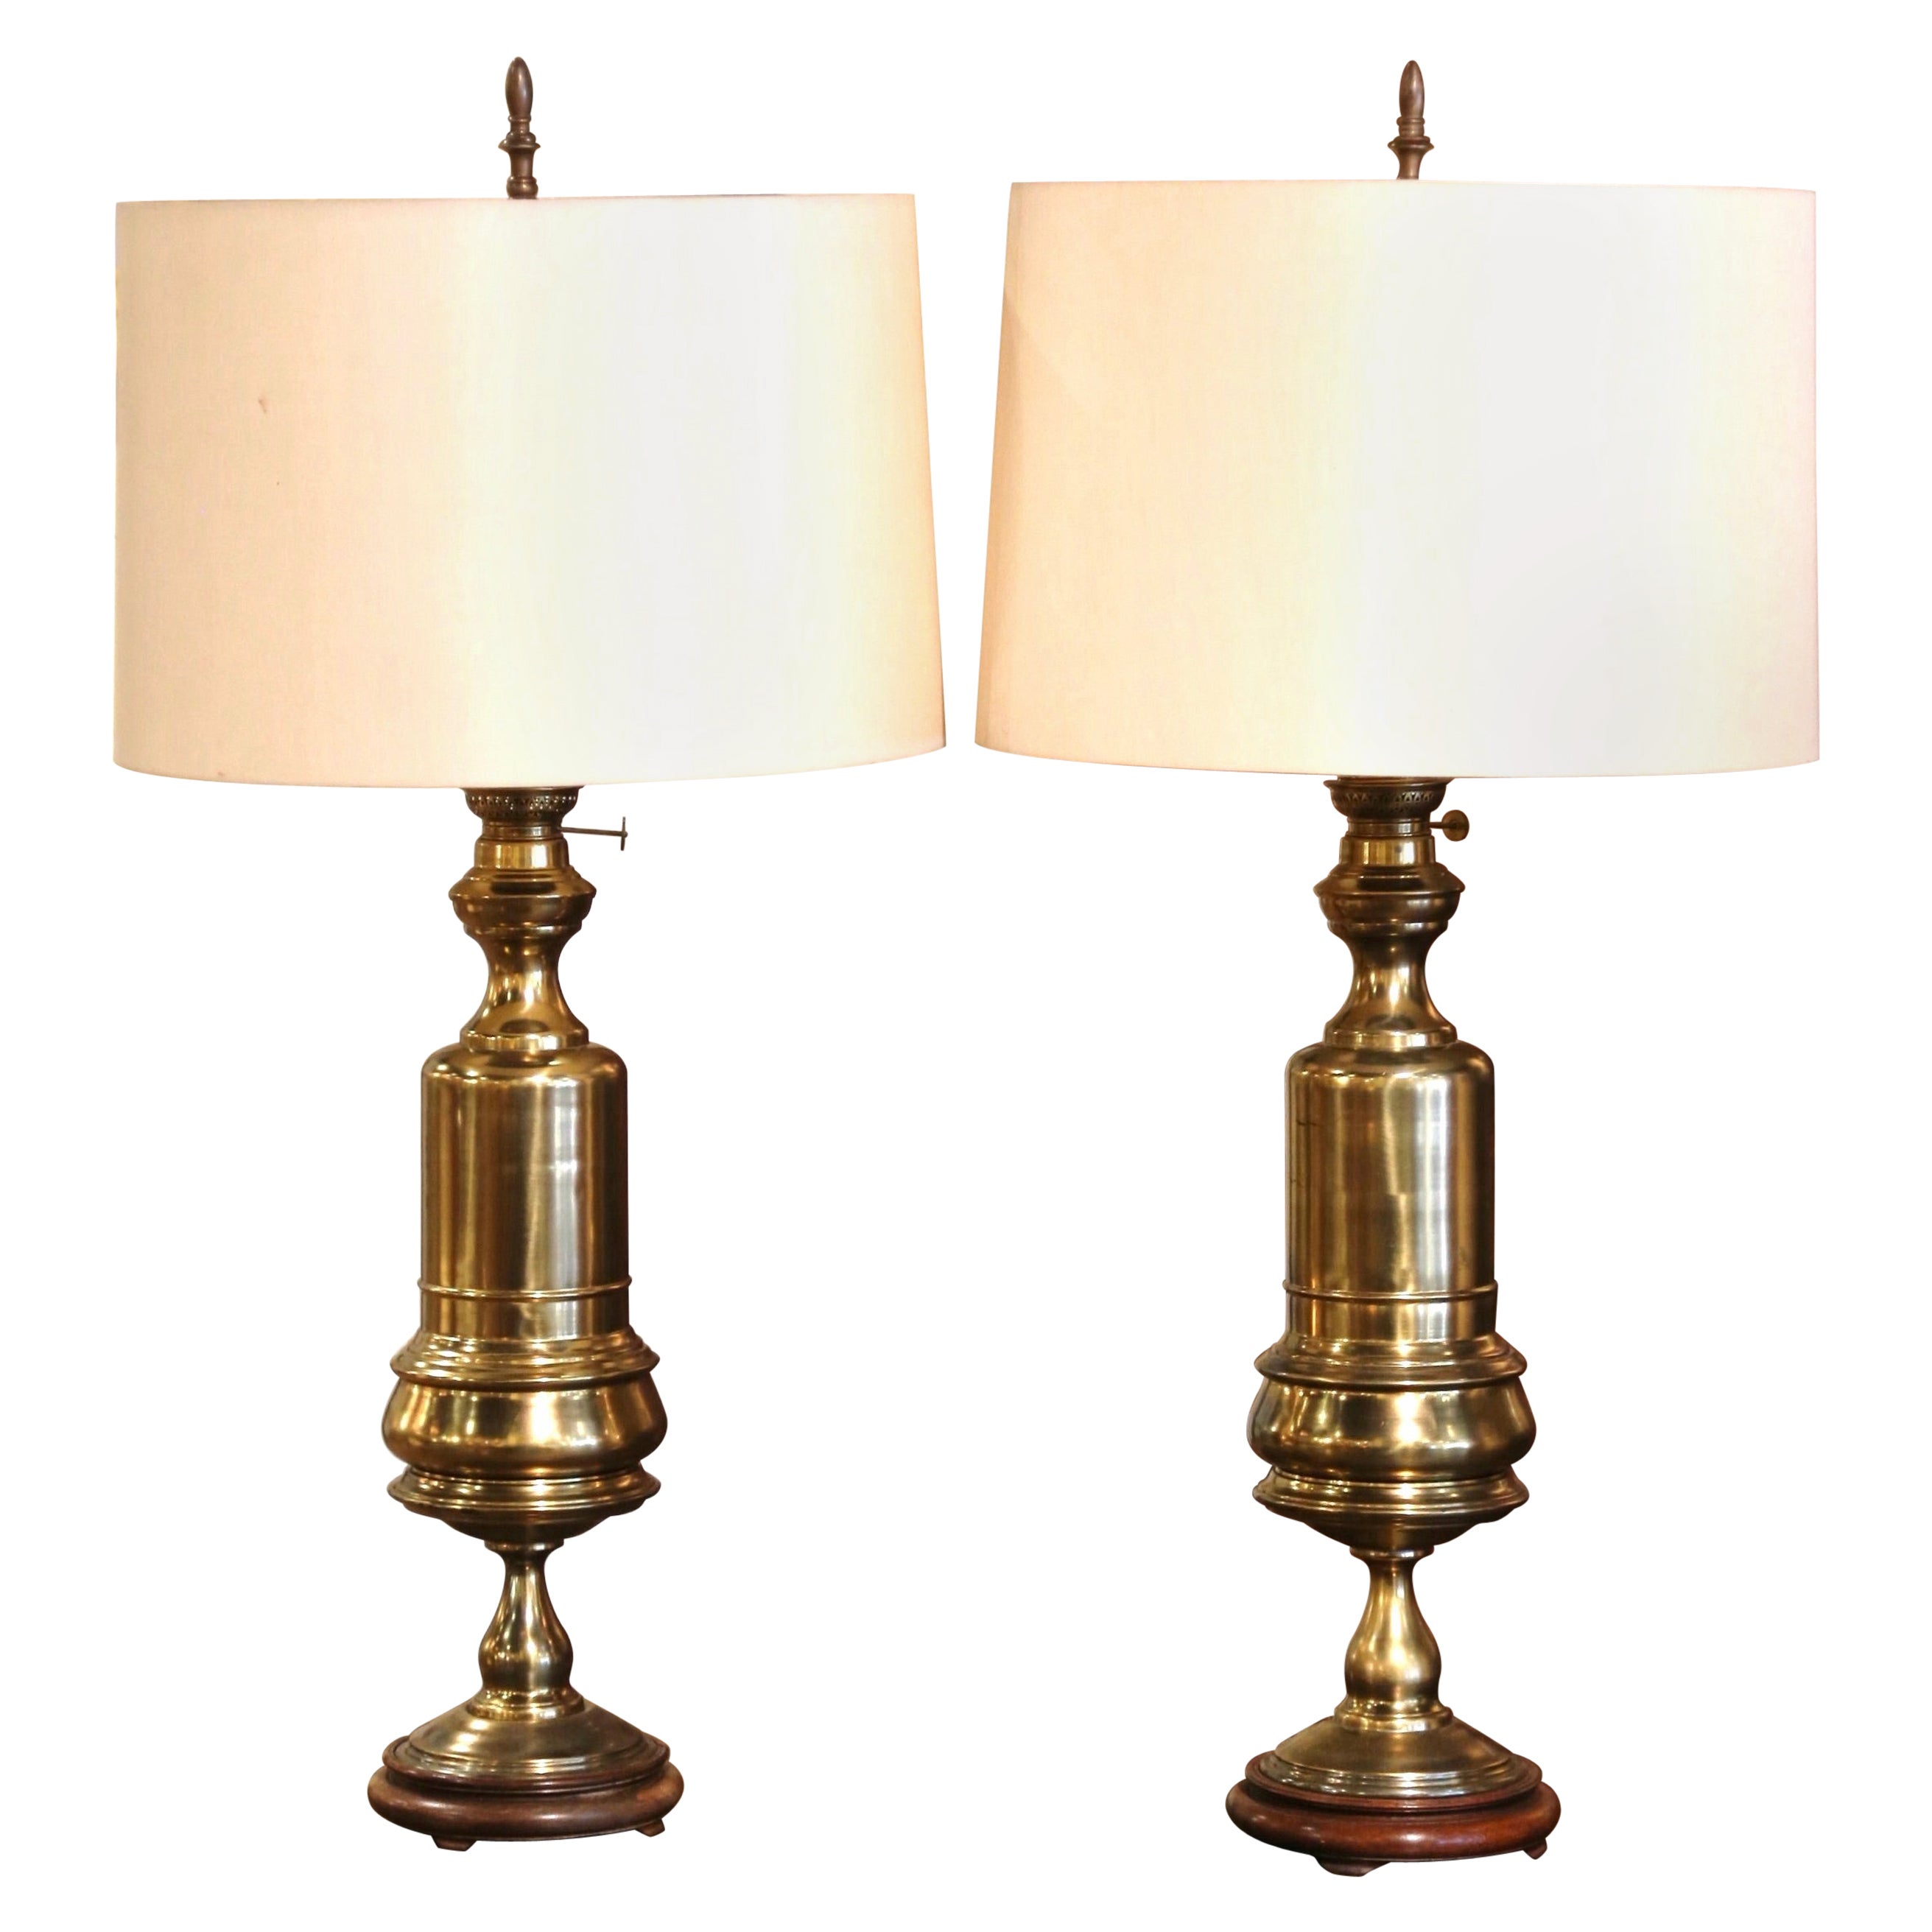 Pair of 19th Century French Brass Oil Table Lamps on Wooden Bases